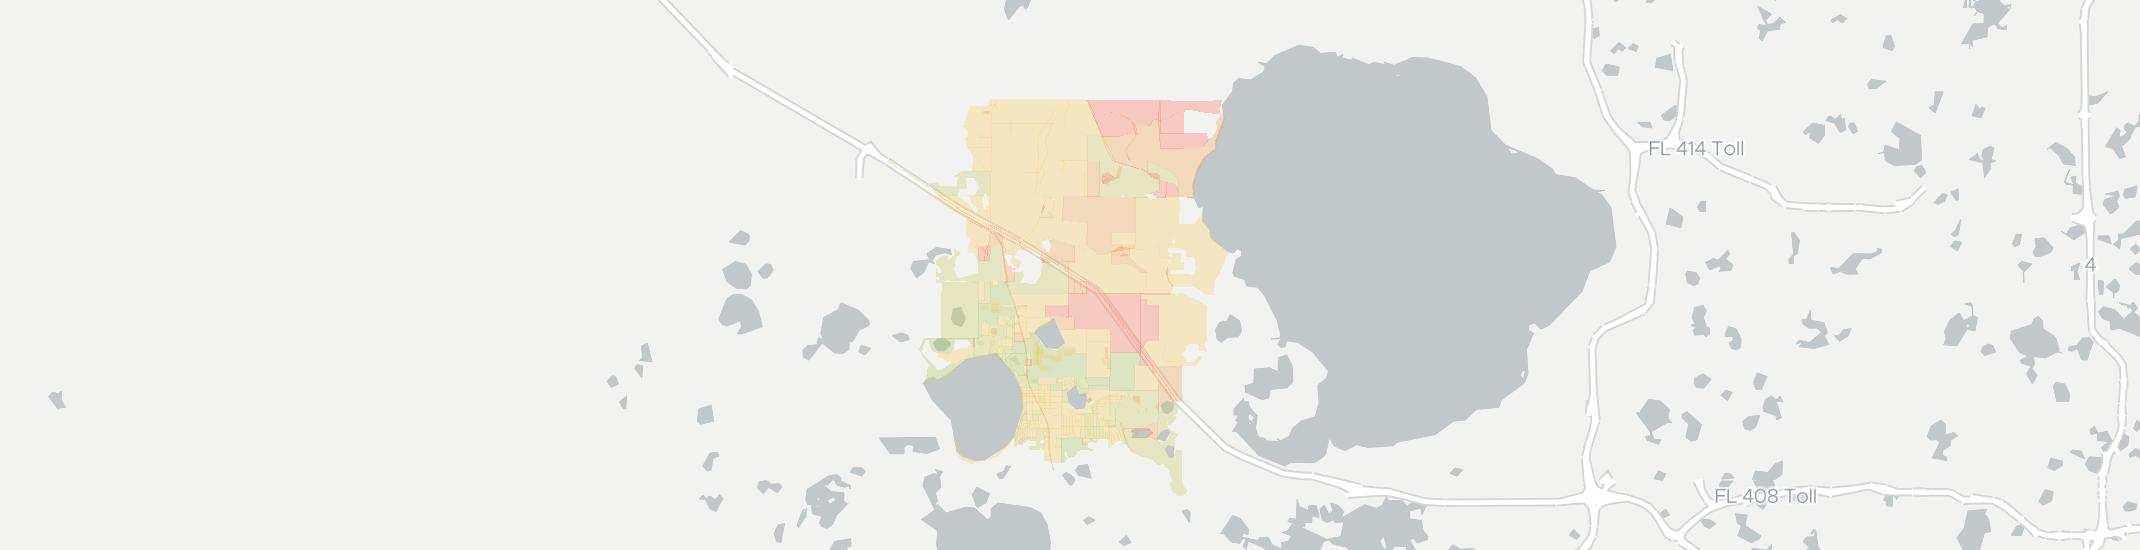 Minneola Internet Competition Map. Click for interactive map